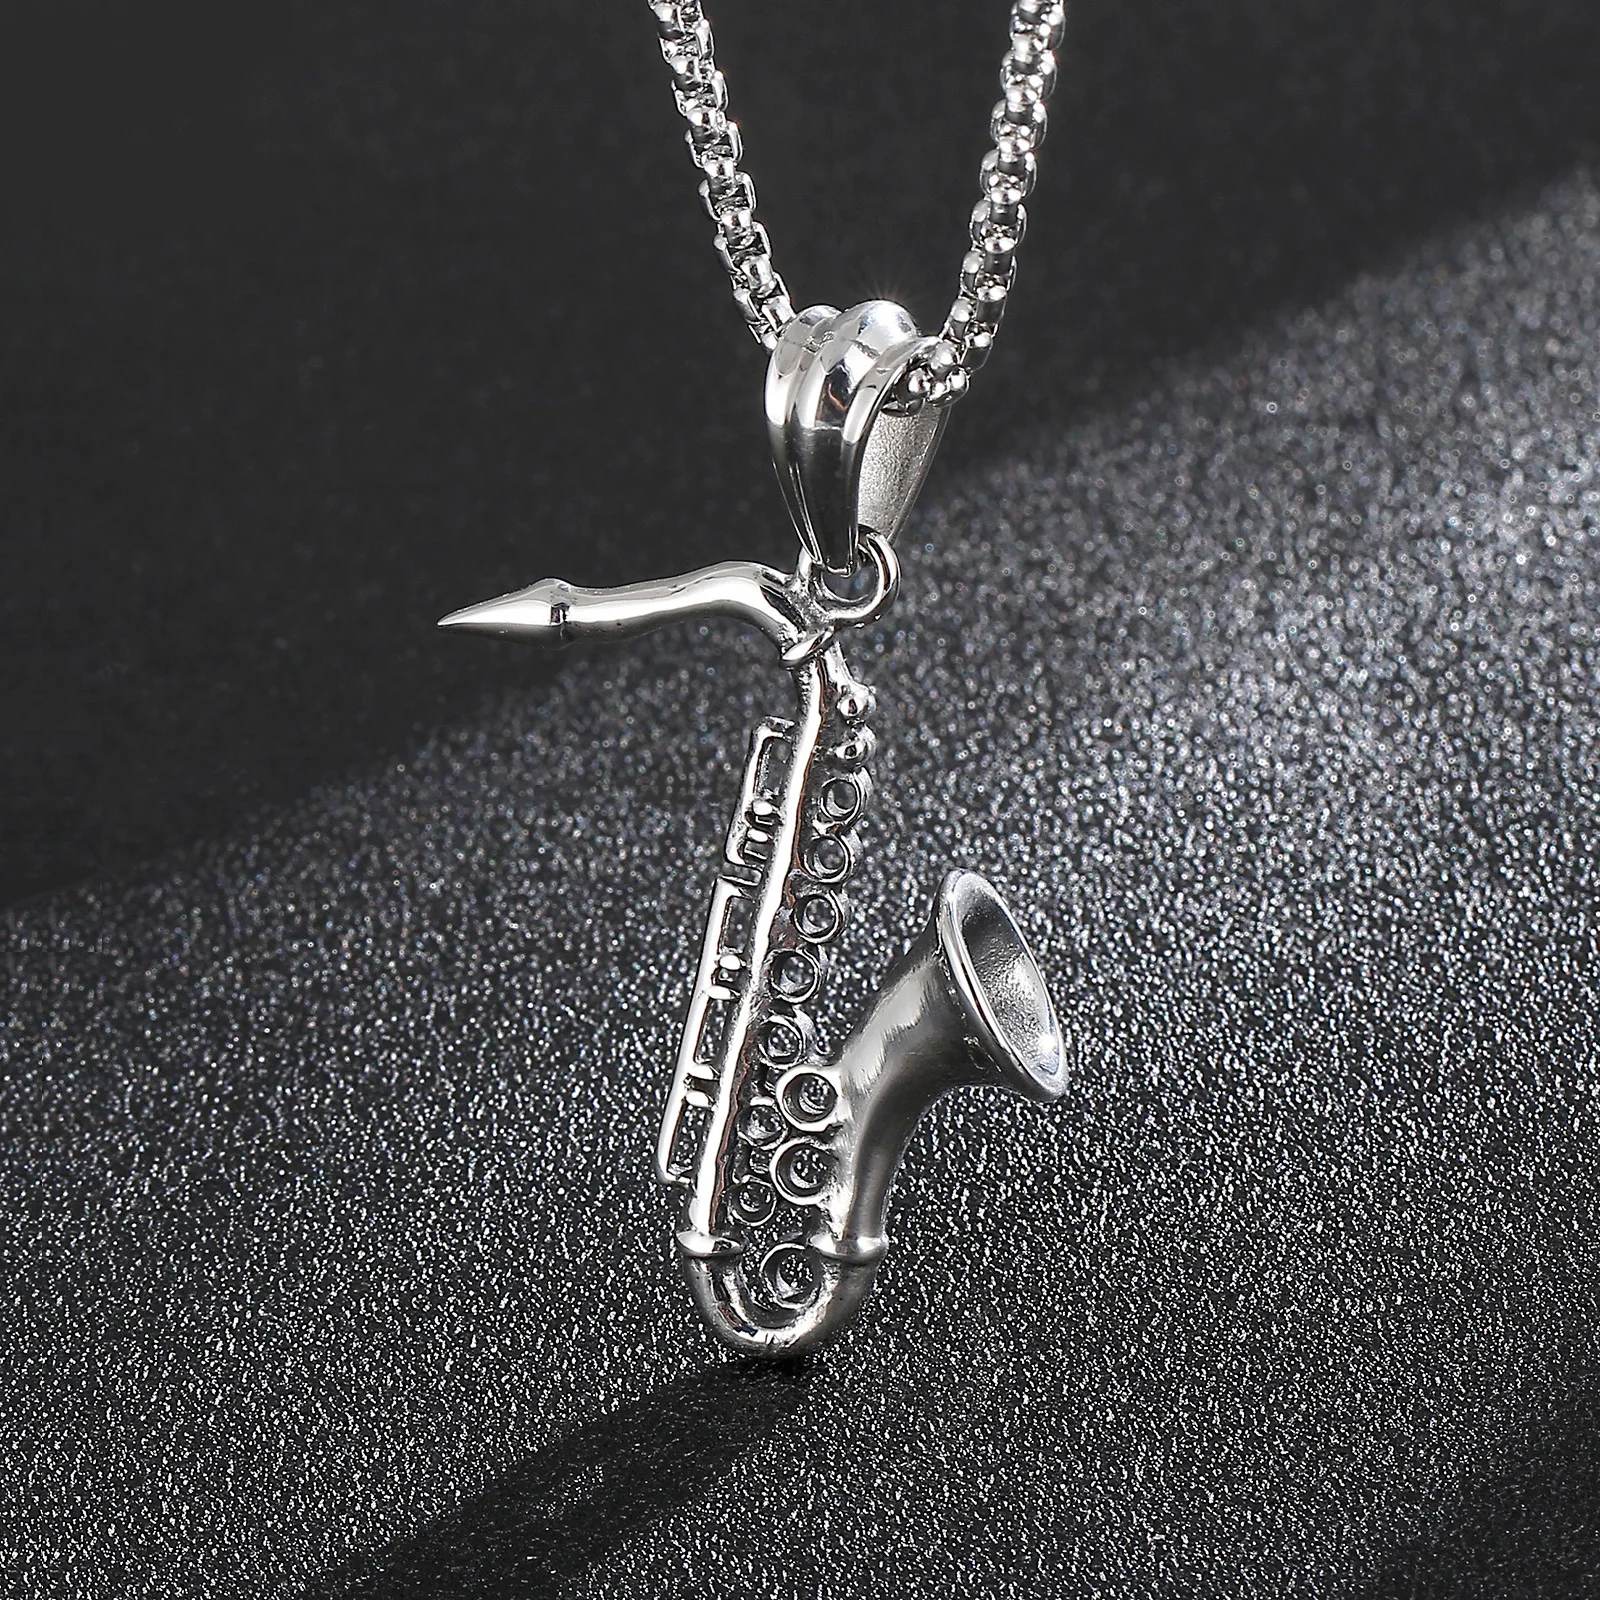 

HaoYi Stainless Steel Saxophone Musical Instrument Pendant Necklace For Men Fashion Personality Punk Hip Hop Rock Jewelry